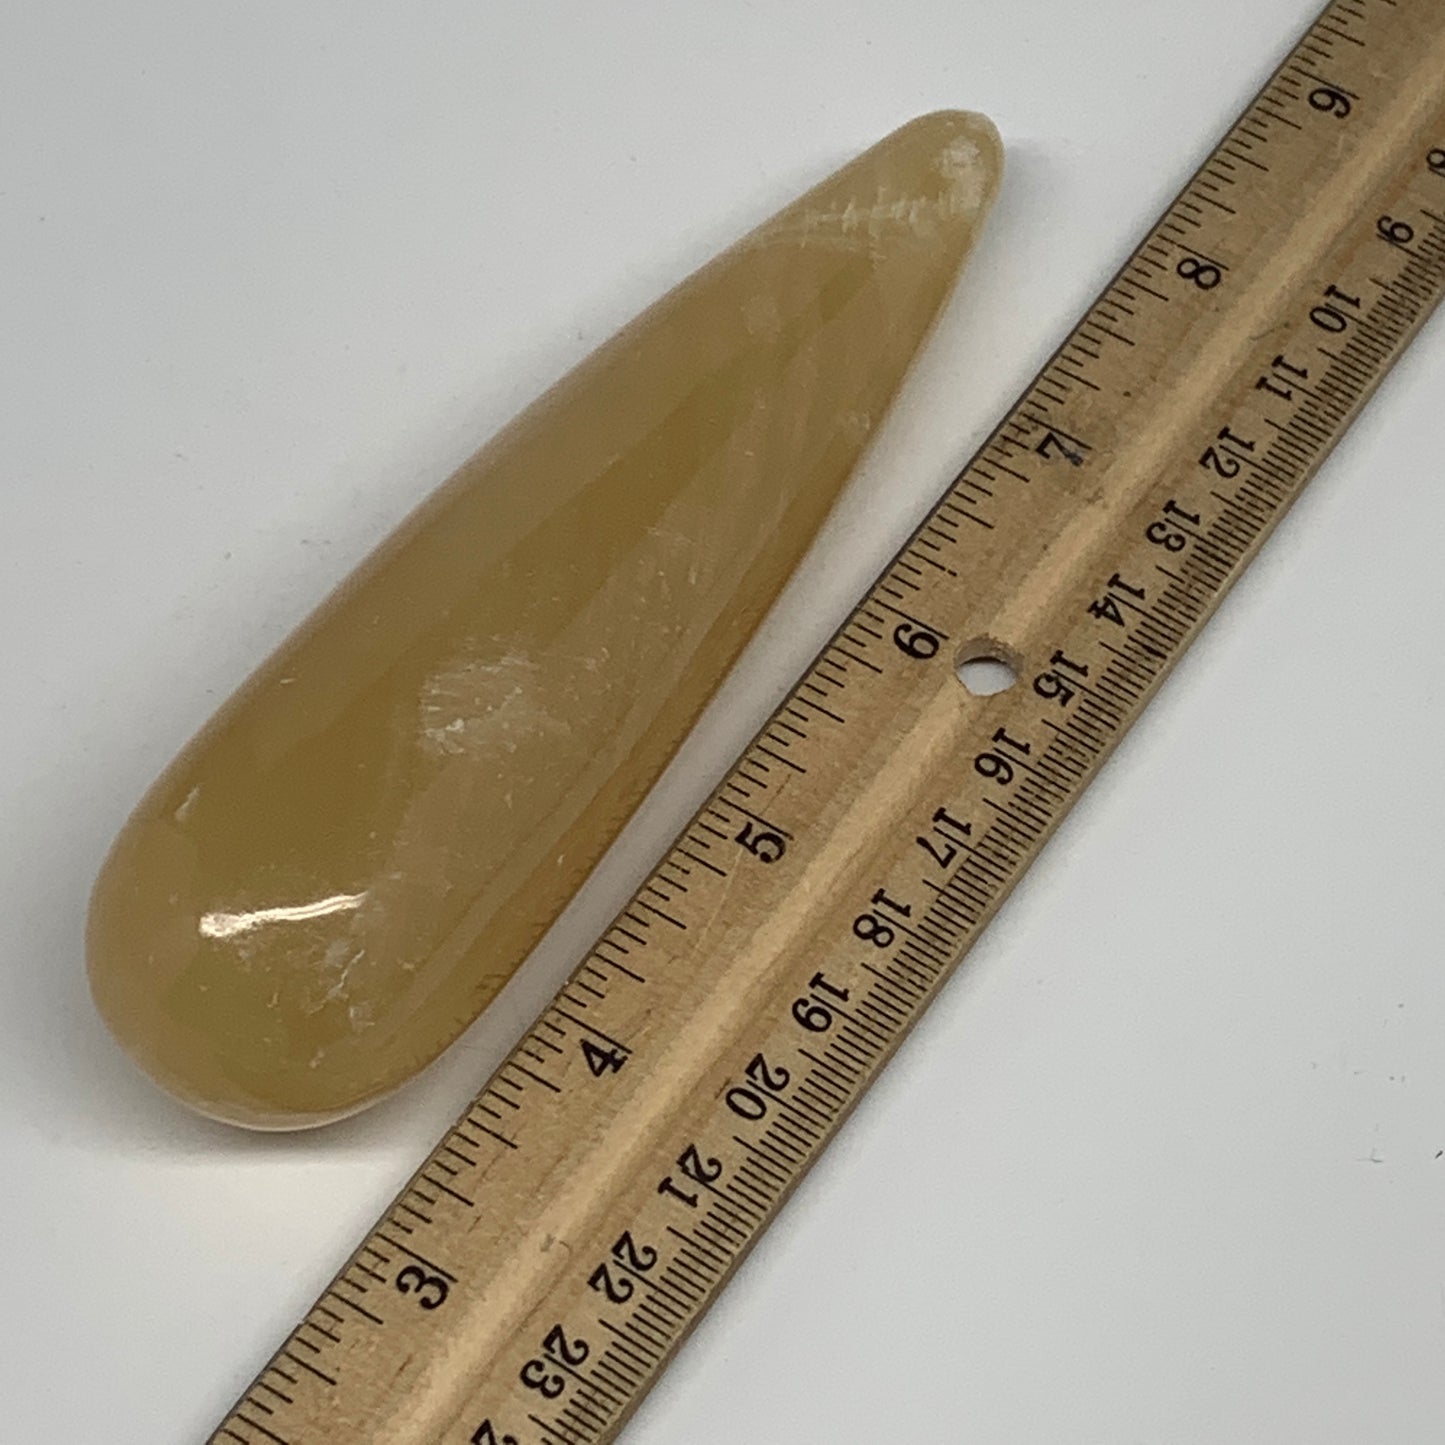 192.7g,5.1"x1.3" Natural Brown Calcite Wand Stick,Home Decor, Collectible, B6028